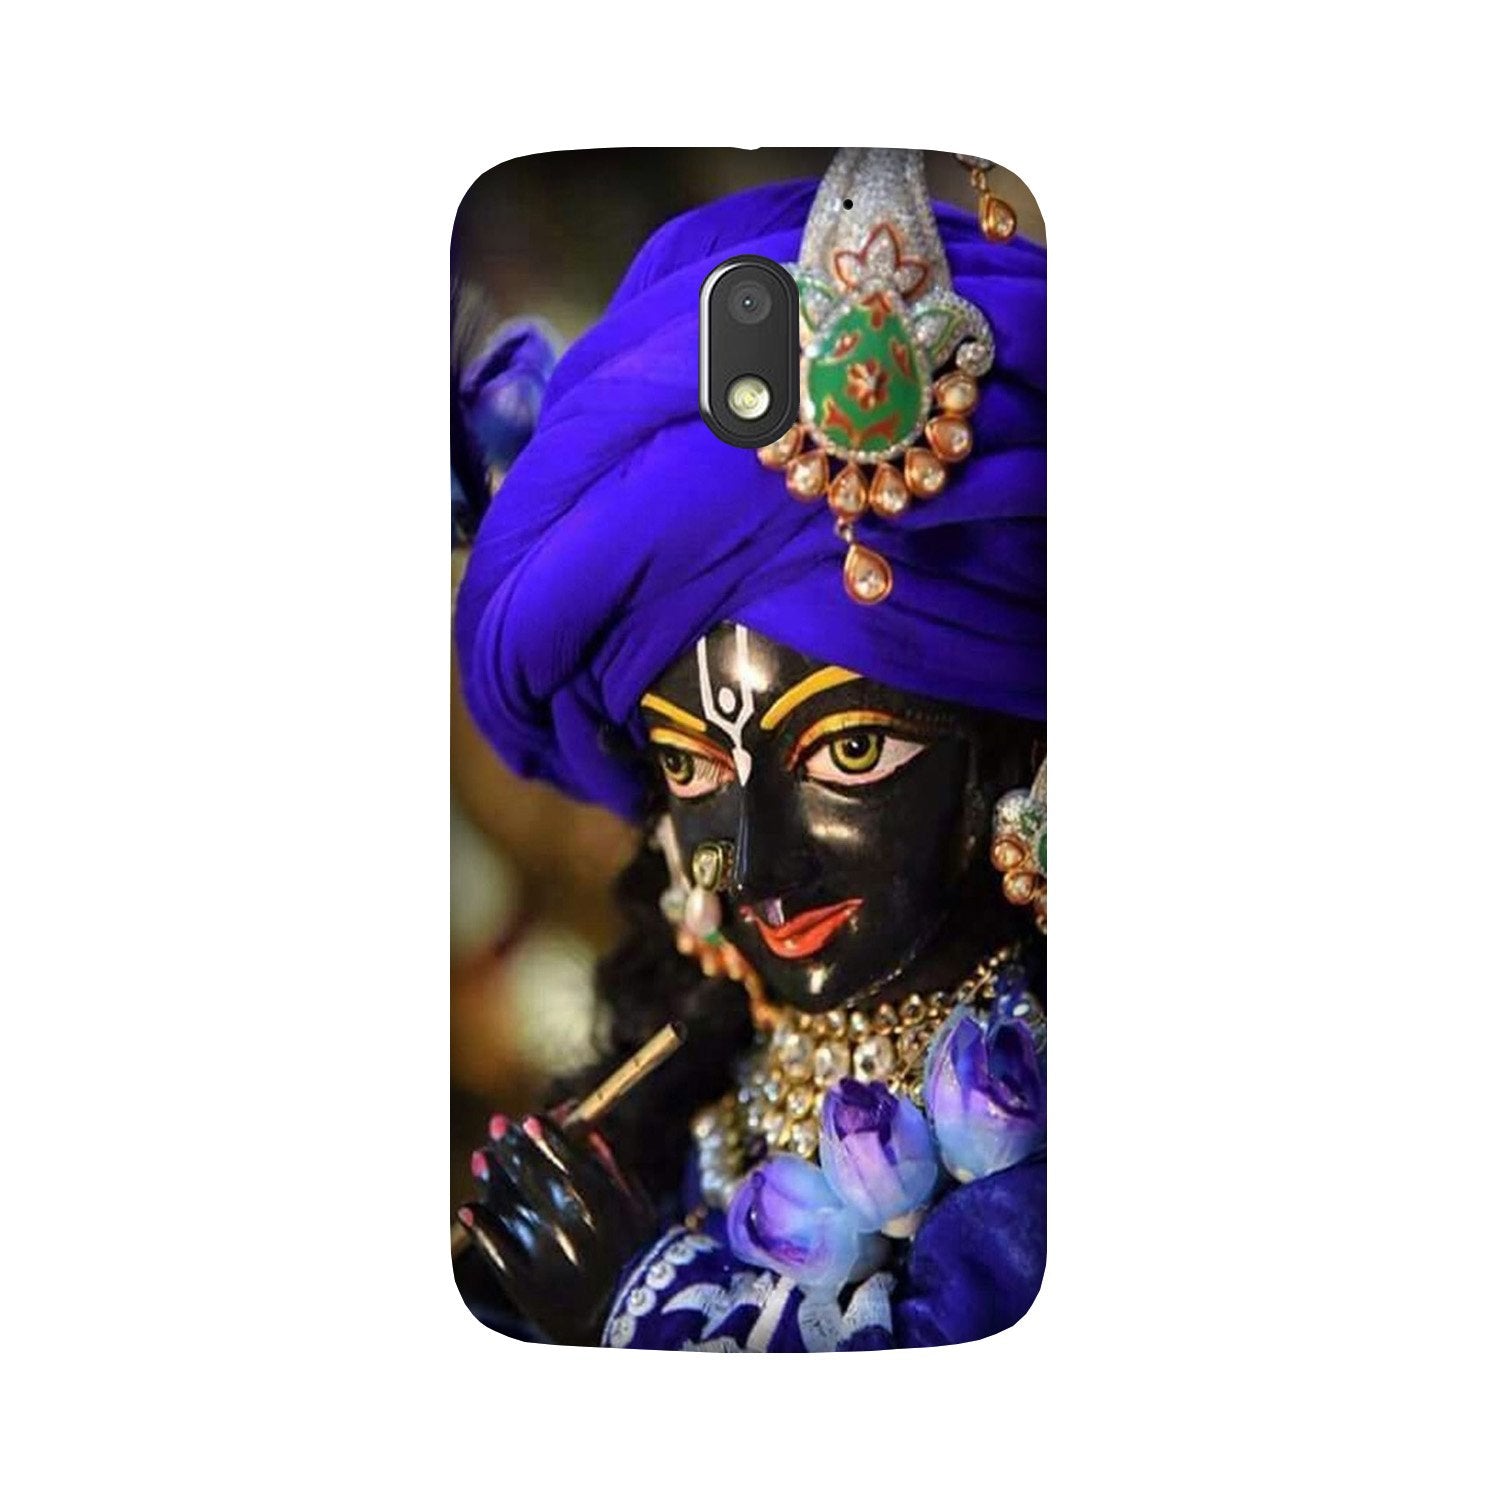 Lord Krishna4 Case for Moto G4 Play